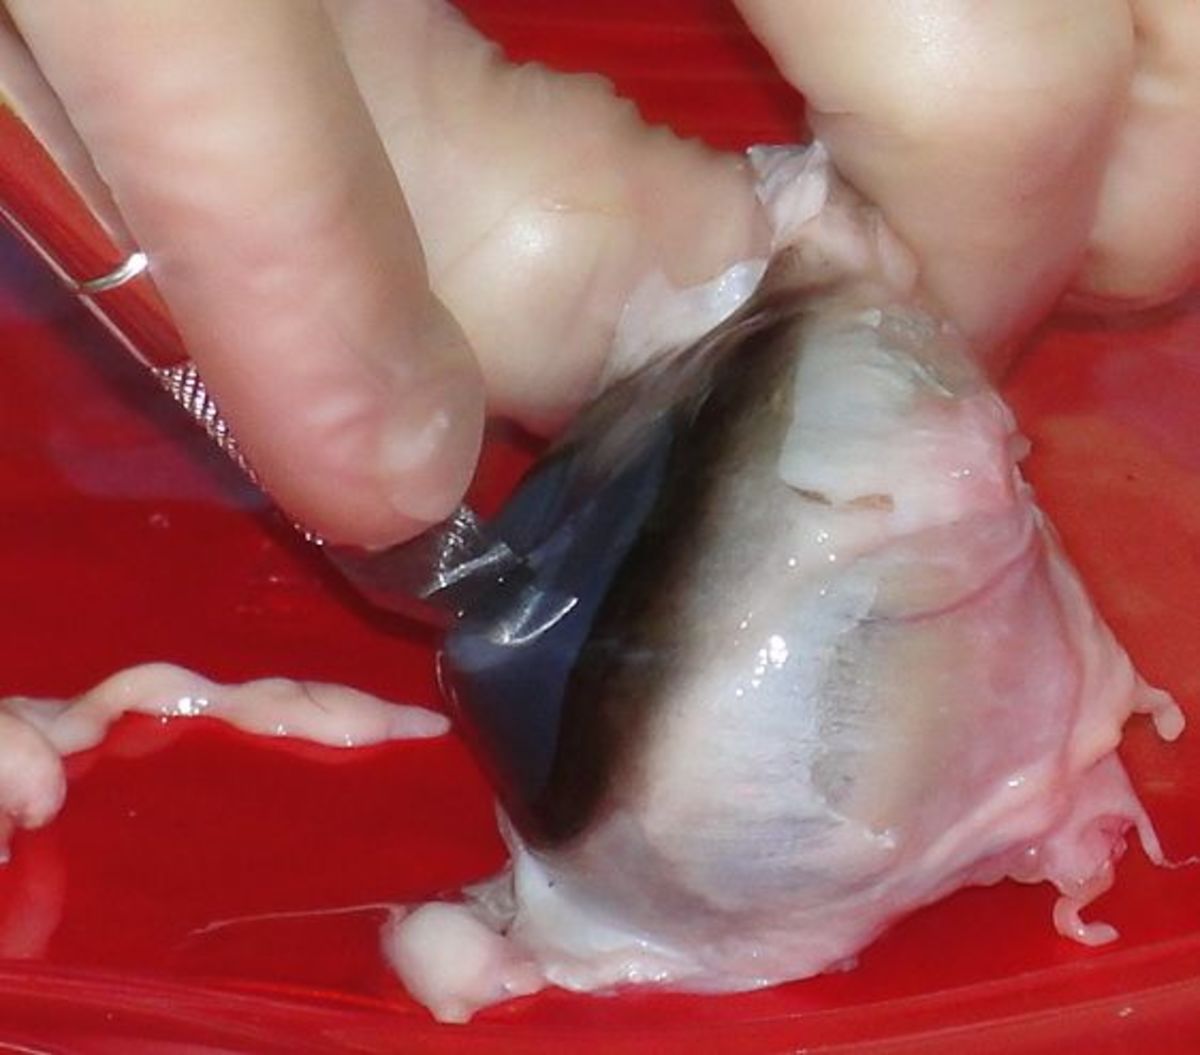 Dissecting a cow eyeball